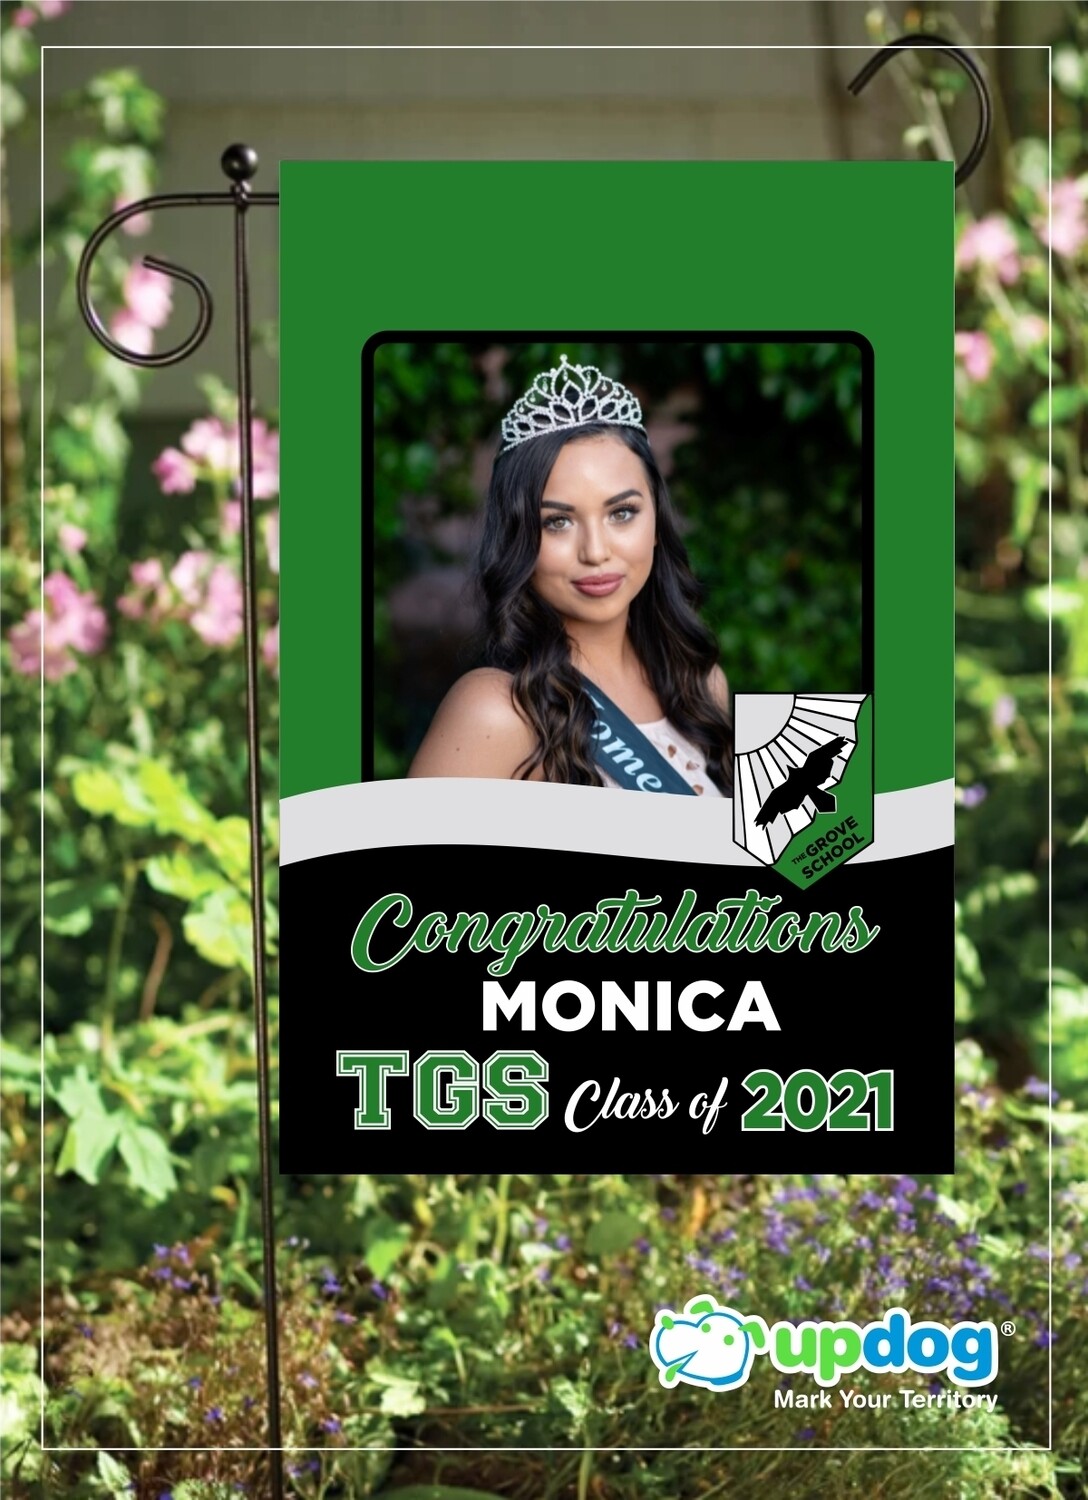 The Grove High School - Personalized Photo and Name, Class of 2021 Senior Graduation Garden Flag, Class of 2021 Garden Flag, Congratulations Garden Flag